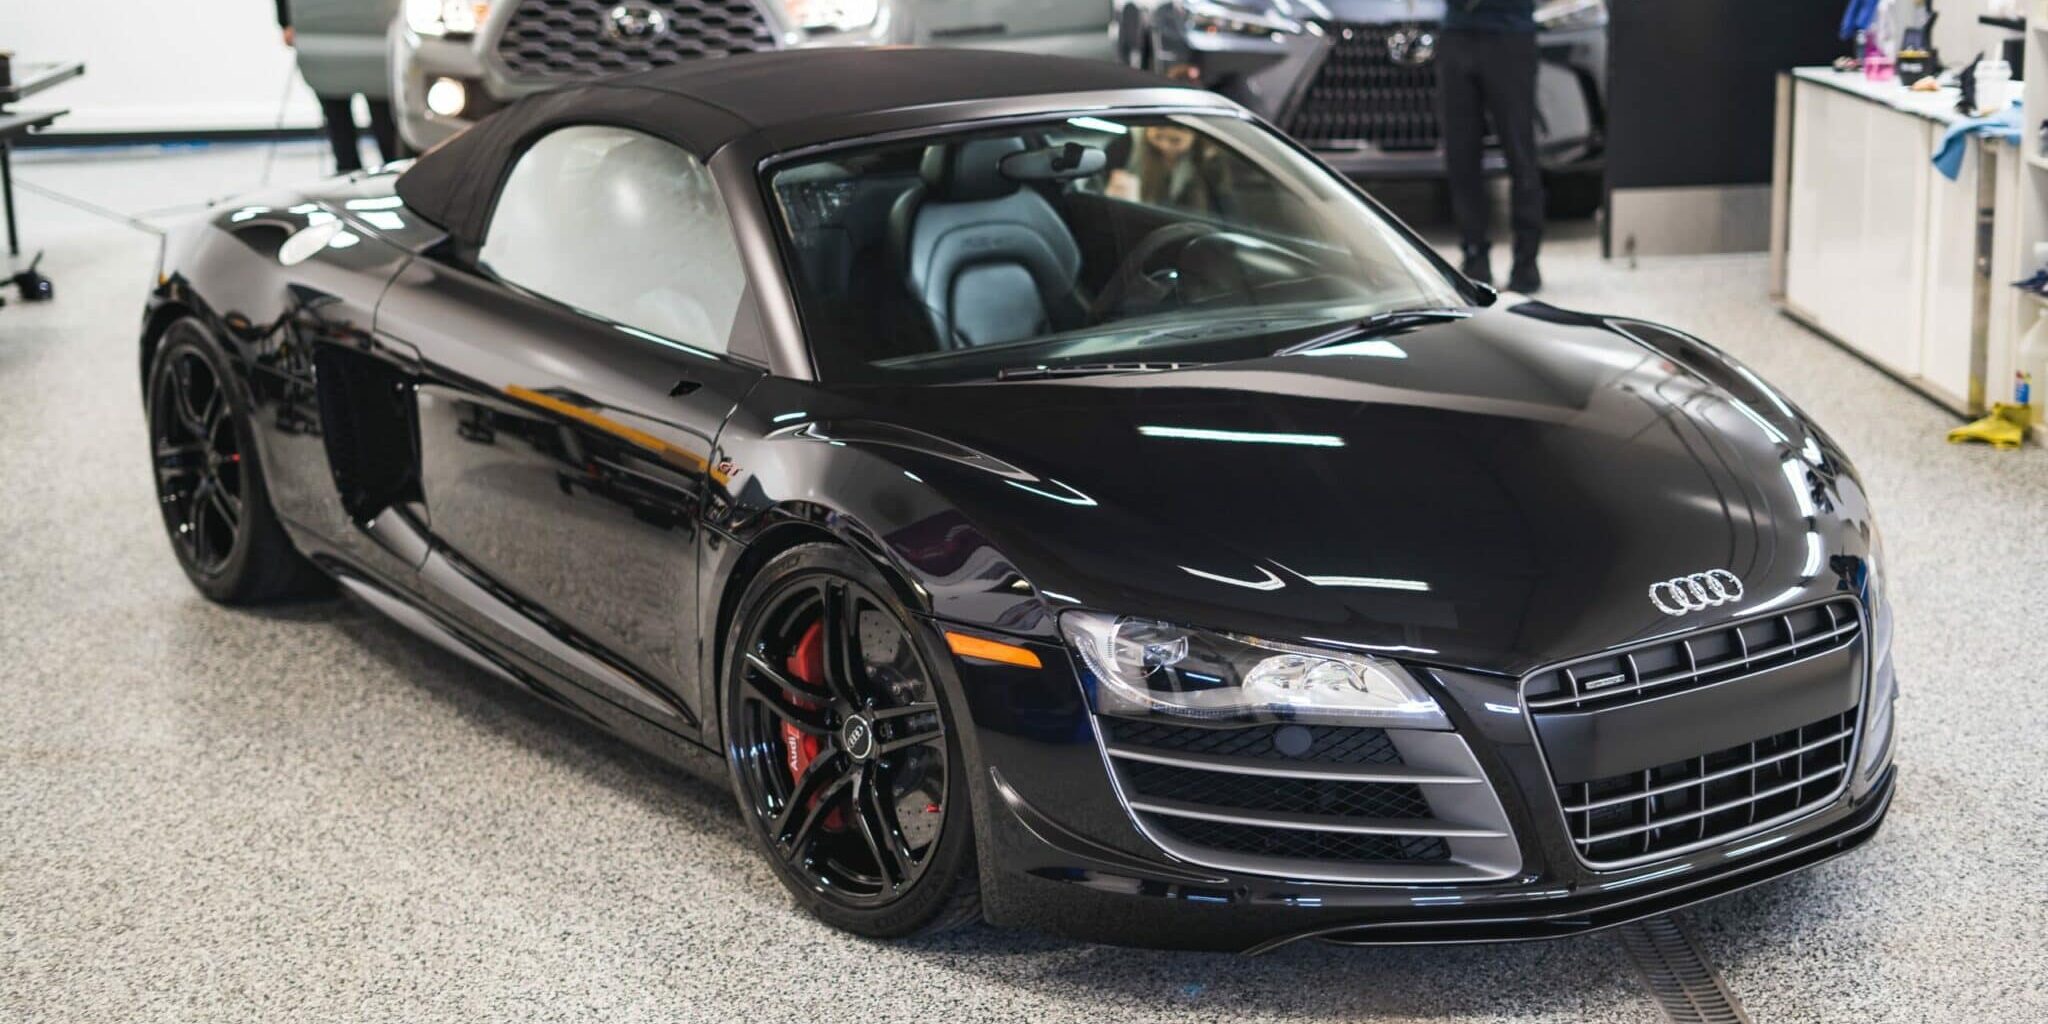 Rare Gated Manual Audi R8 in Edmonton after XPEL PPF and ceramic coating installed